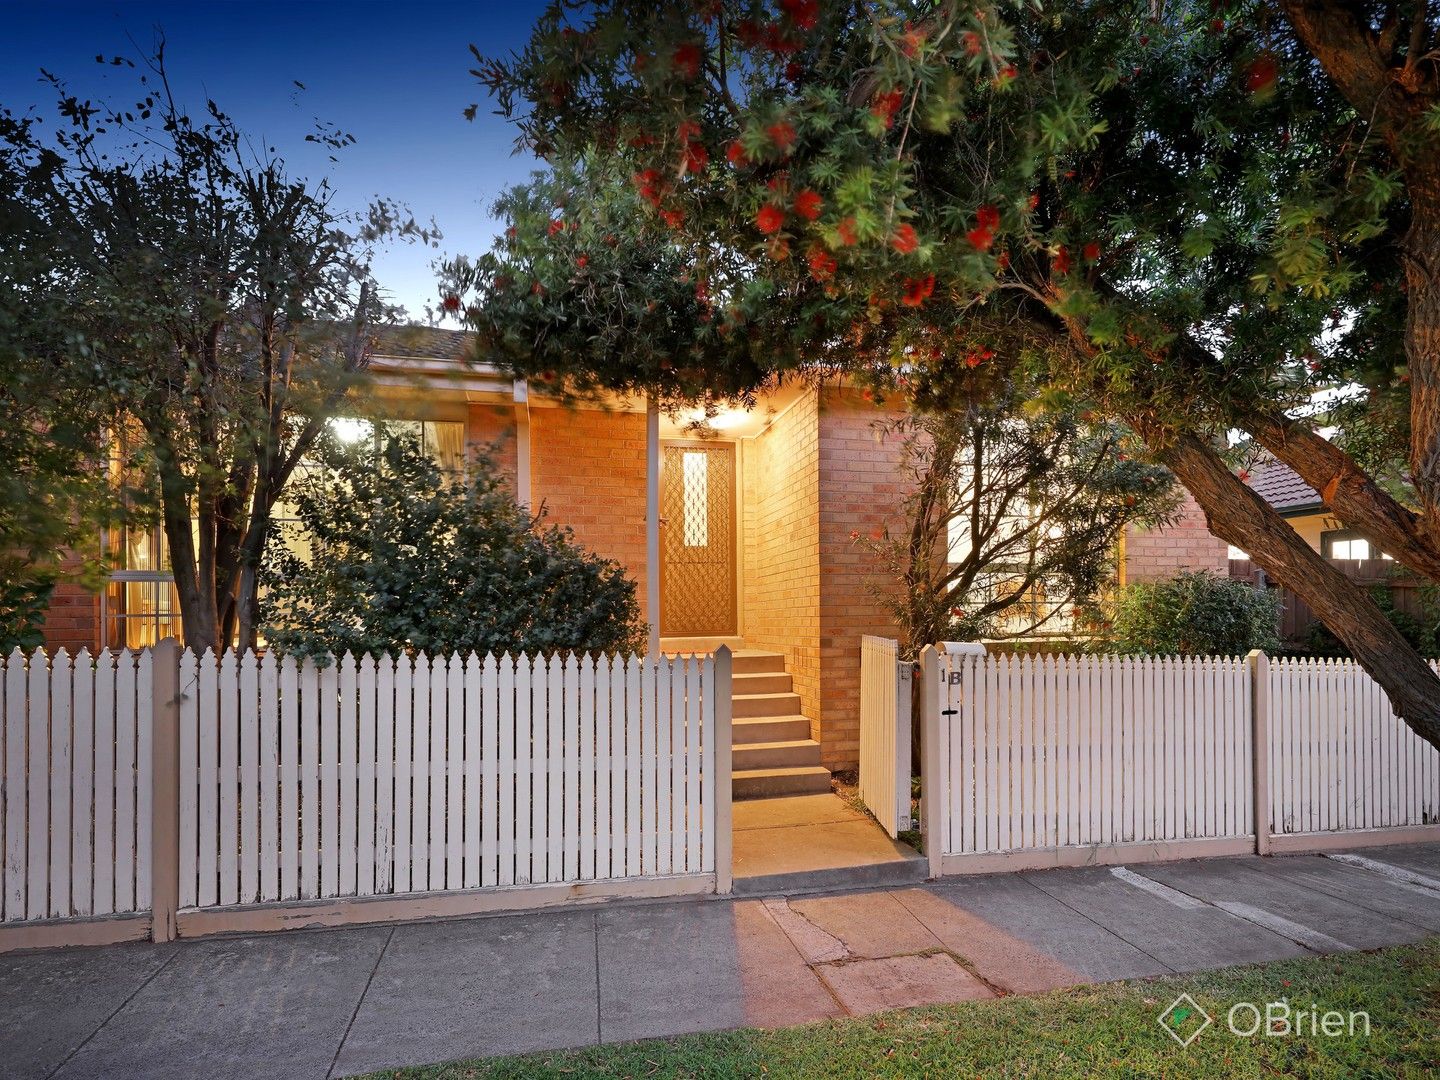 2 bedrooms Apartment / Unit / Flat in 1B Lehem Ave OAKLEIGH SOUTH VIC, 3167